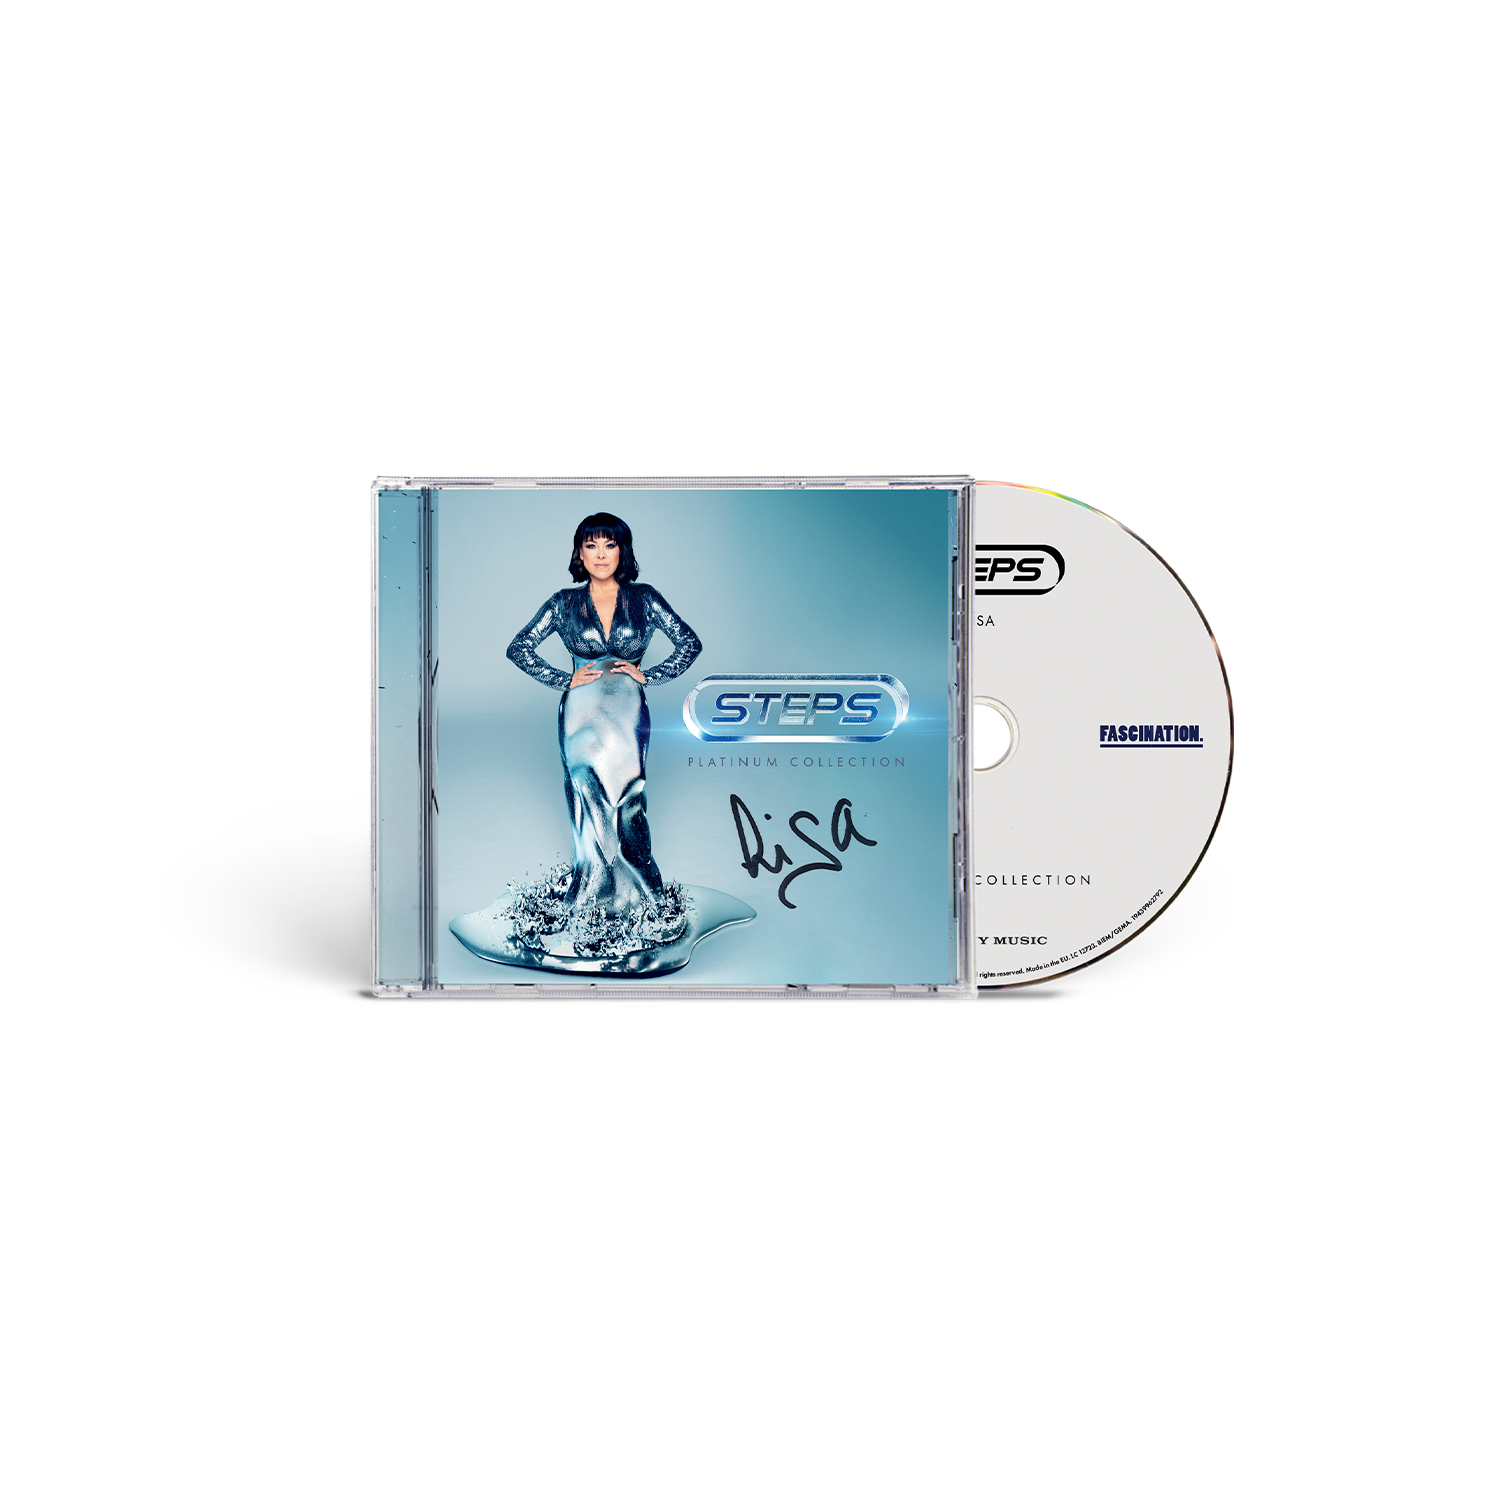 Platinum Collection Signed Lisa Edition Steps The Official Store